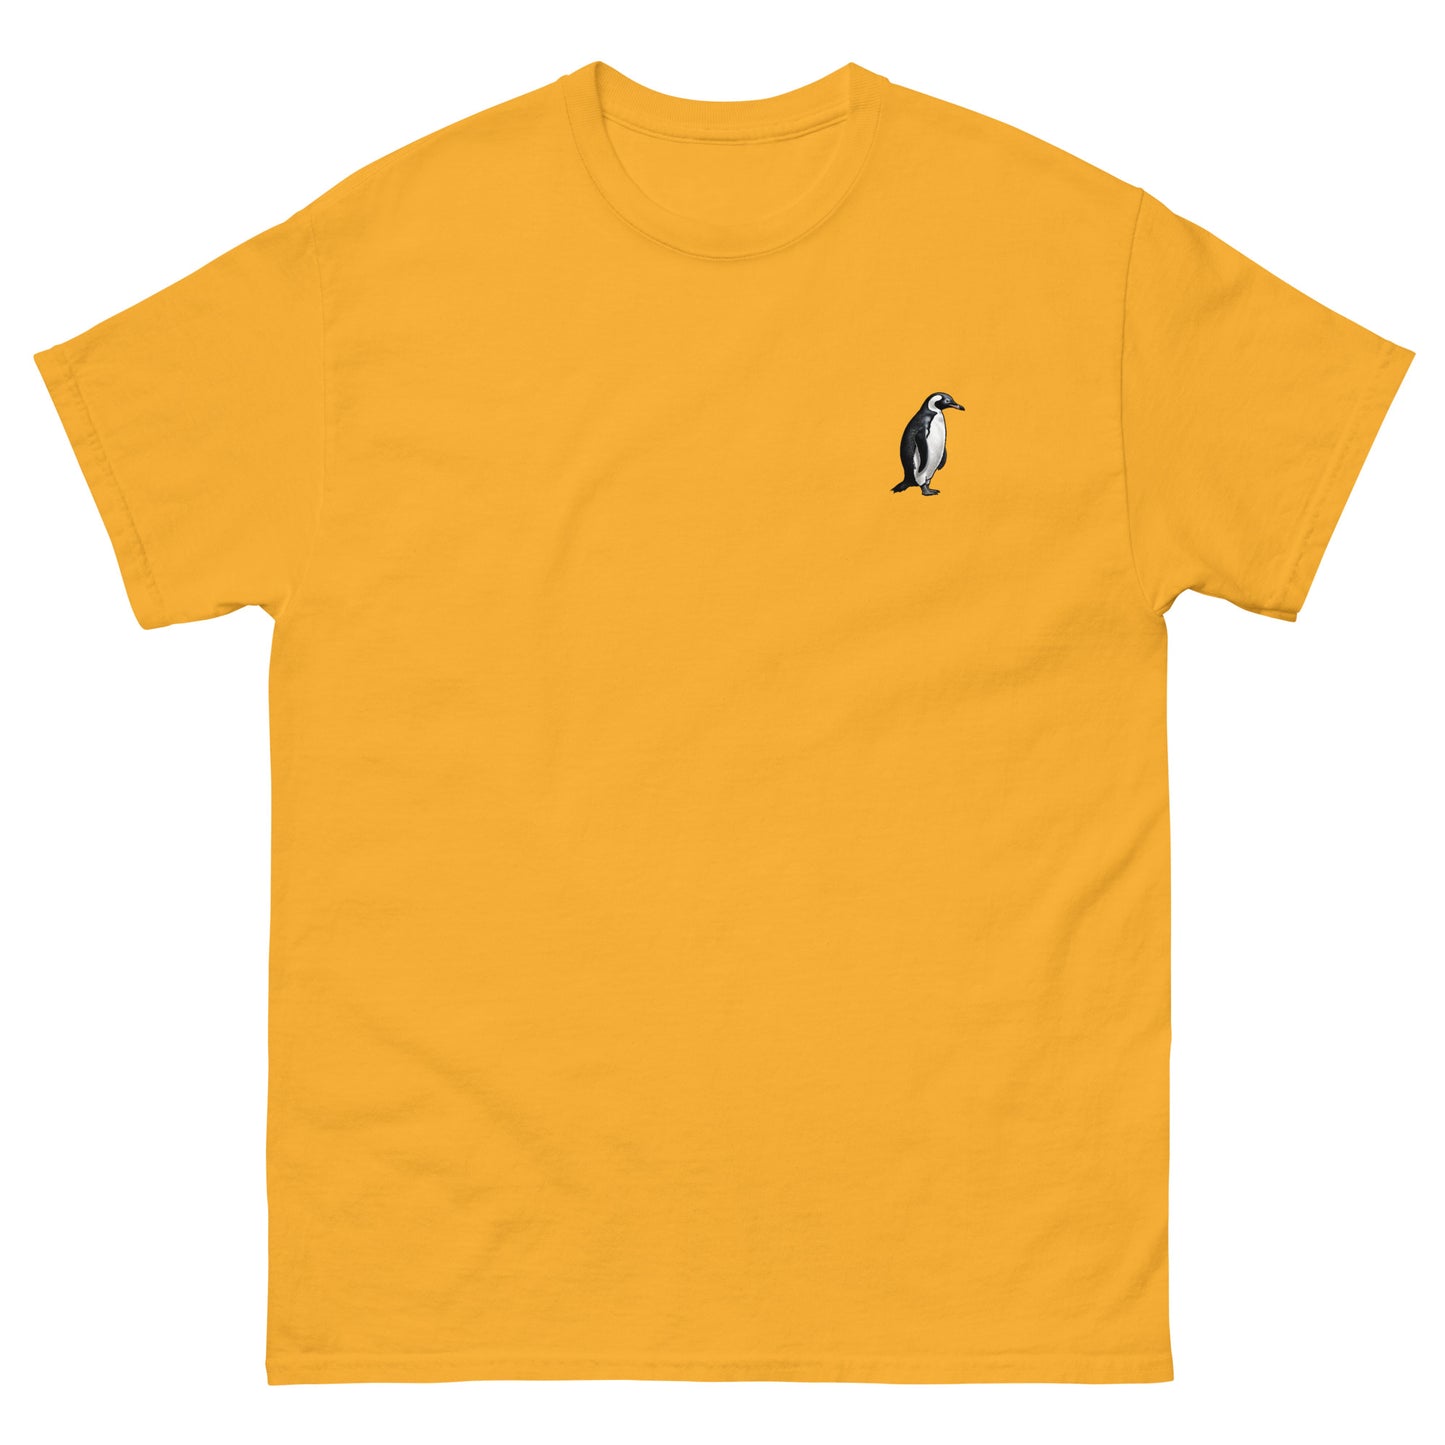 Yellow High Quality Tee - Front Design with a Penguin on left chest - Back Design with a Penguin and a Phrase "Penguins:always dressed to impress, walking on ice like a boss" print